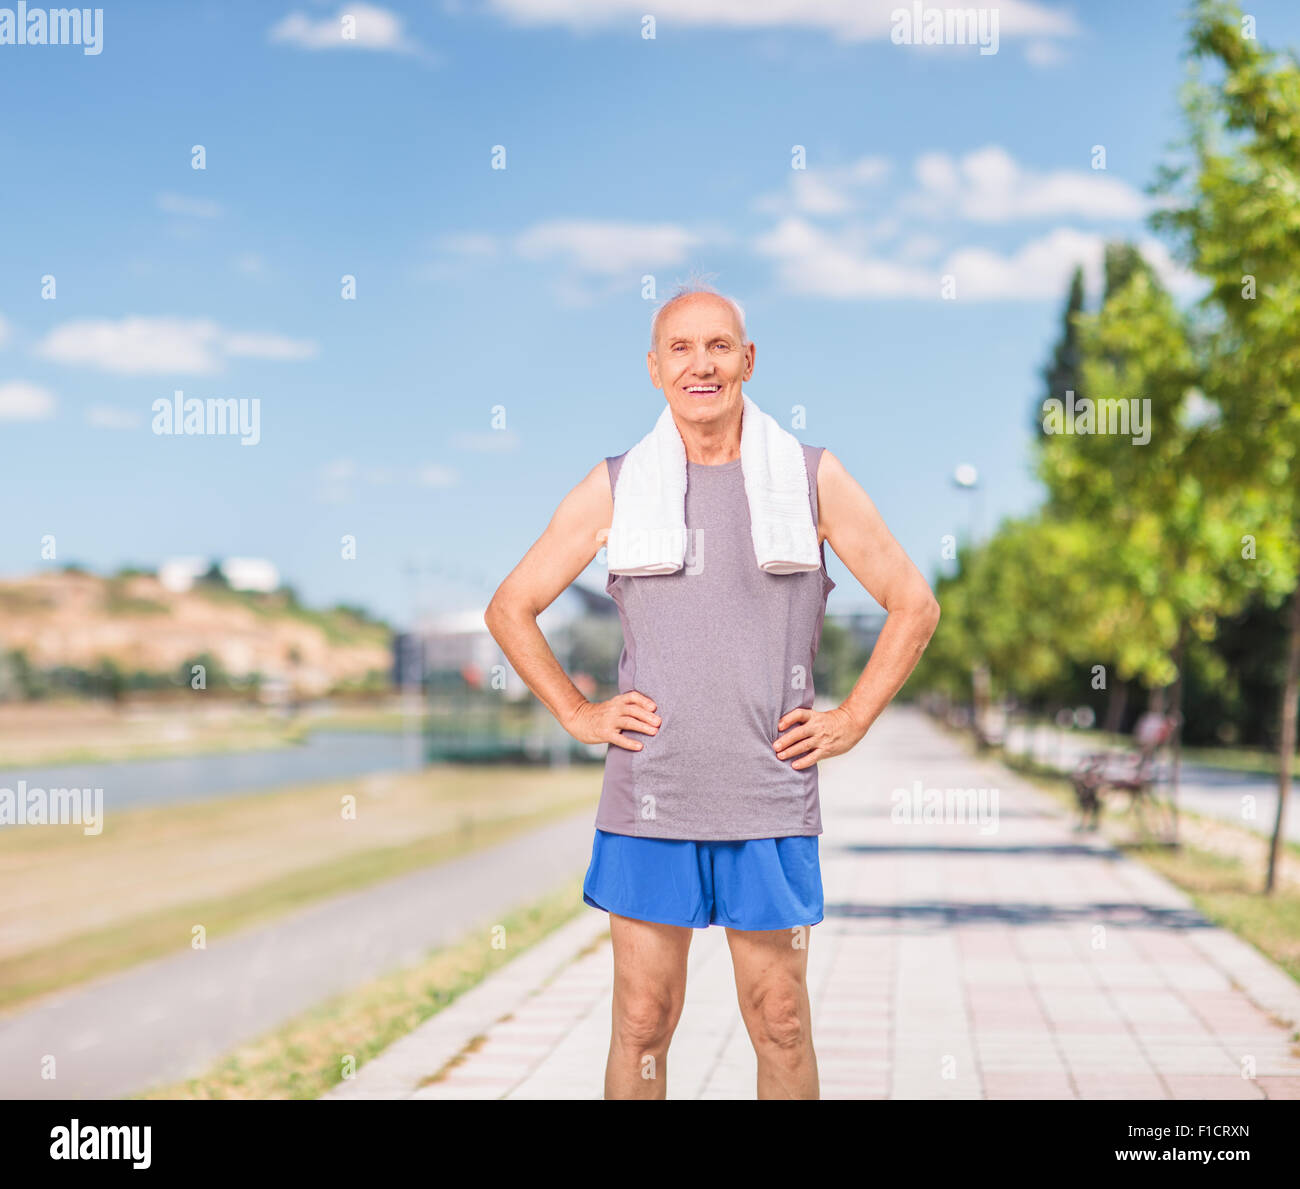 Active senior man in sportswear with a towel around his neck standing on a sidewalk and looking at the camera Stock Photo